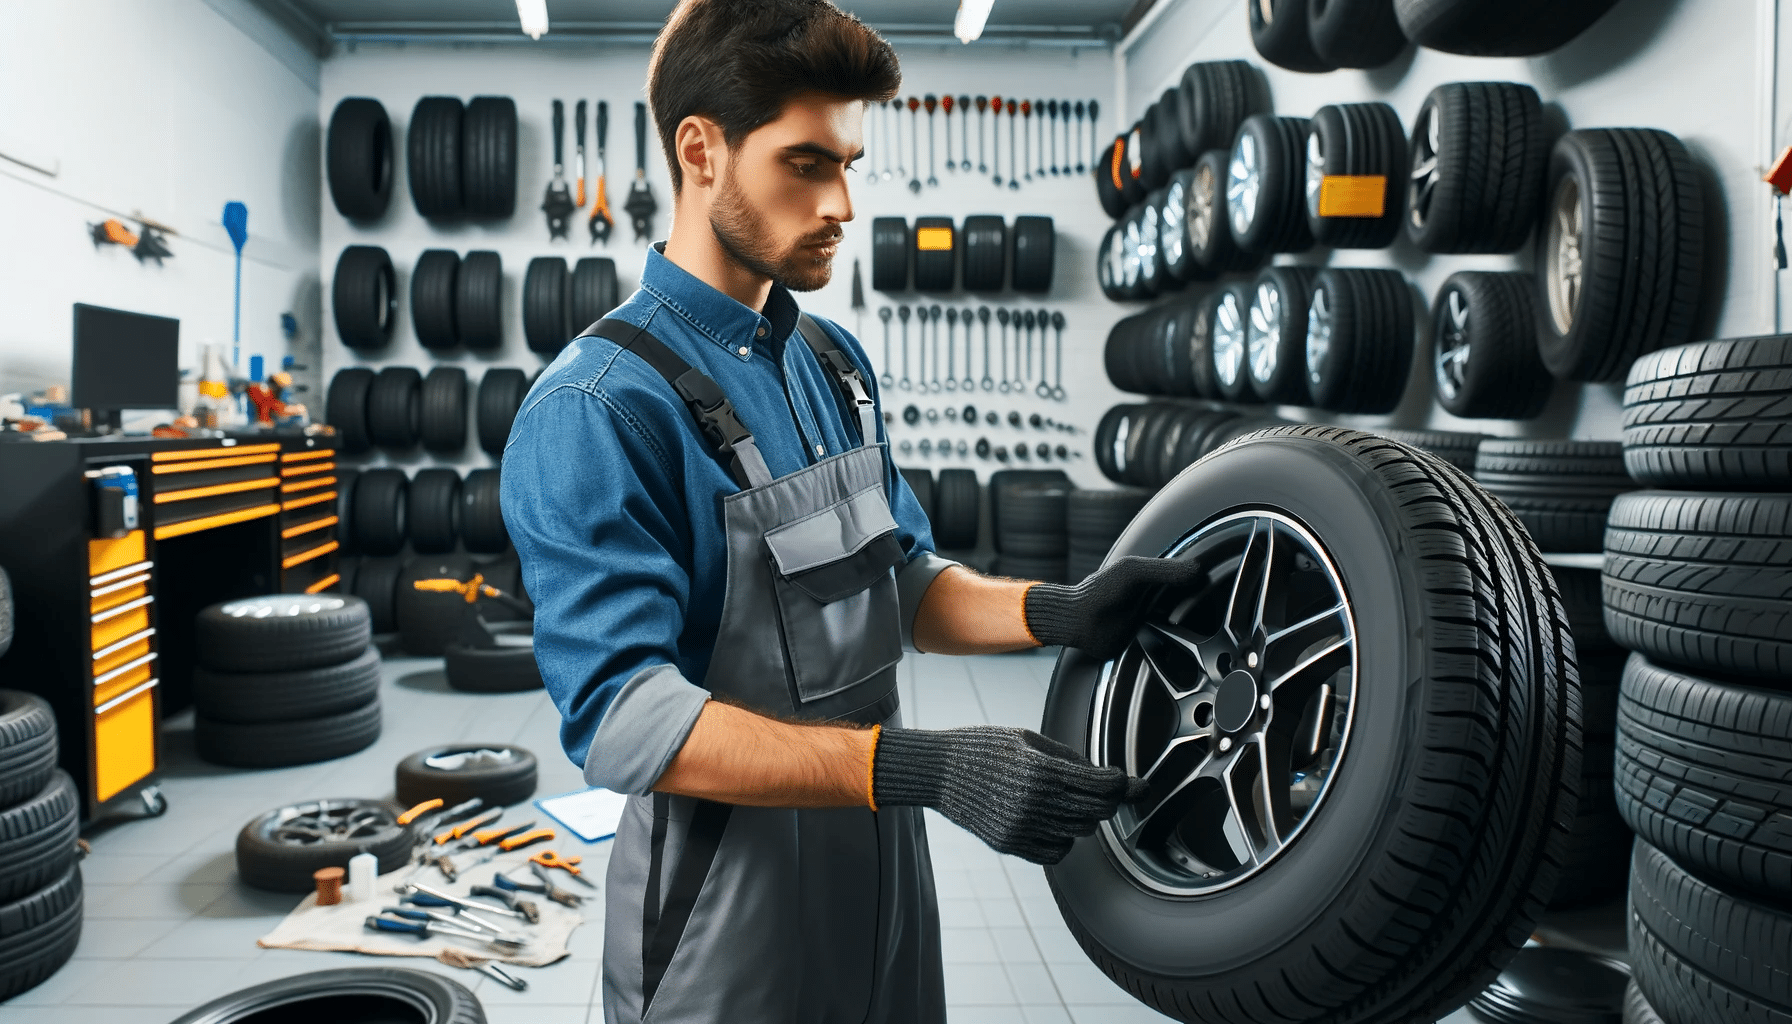 A-professional-mechanic-in-a-well-equipped-auto-repair-shop-wearing-a-uniform-and-safety-gloves-skillfully-mounting-a-new-tire-onto-a-wheel-the-bac.png